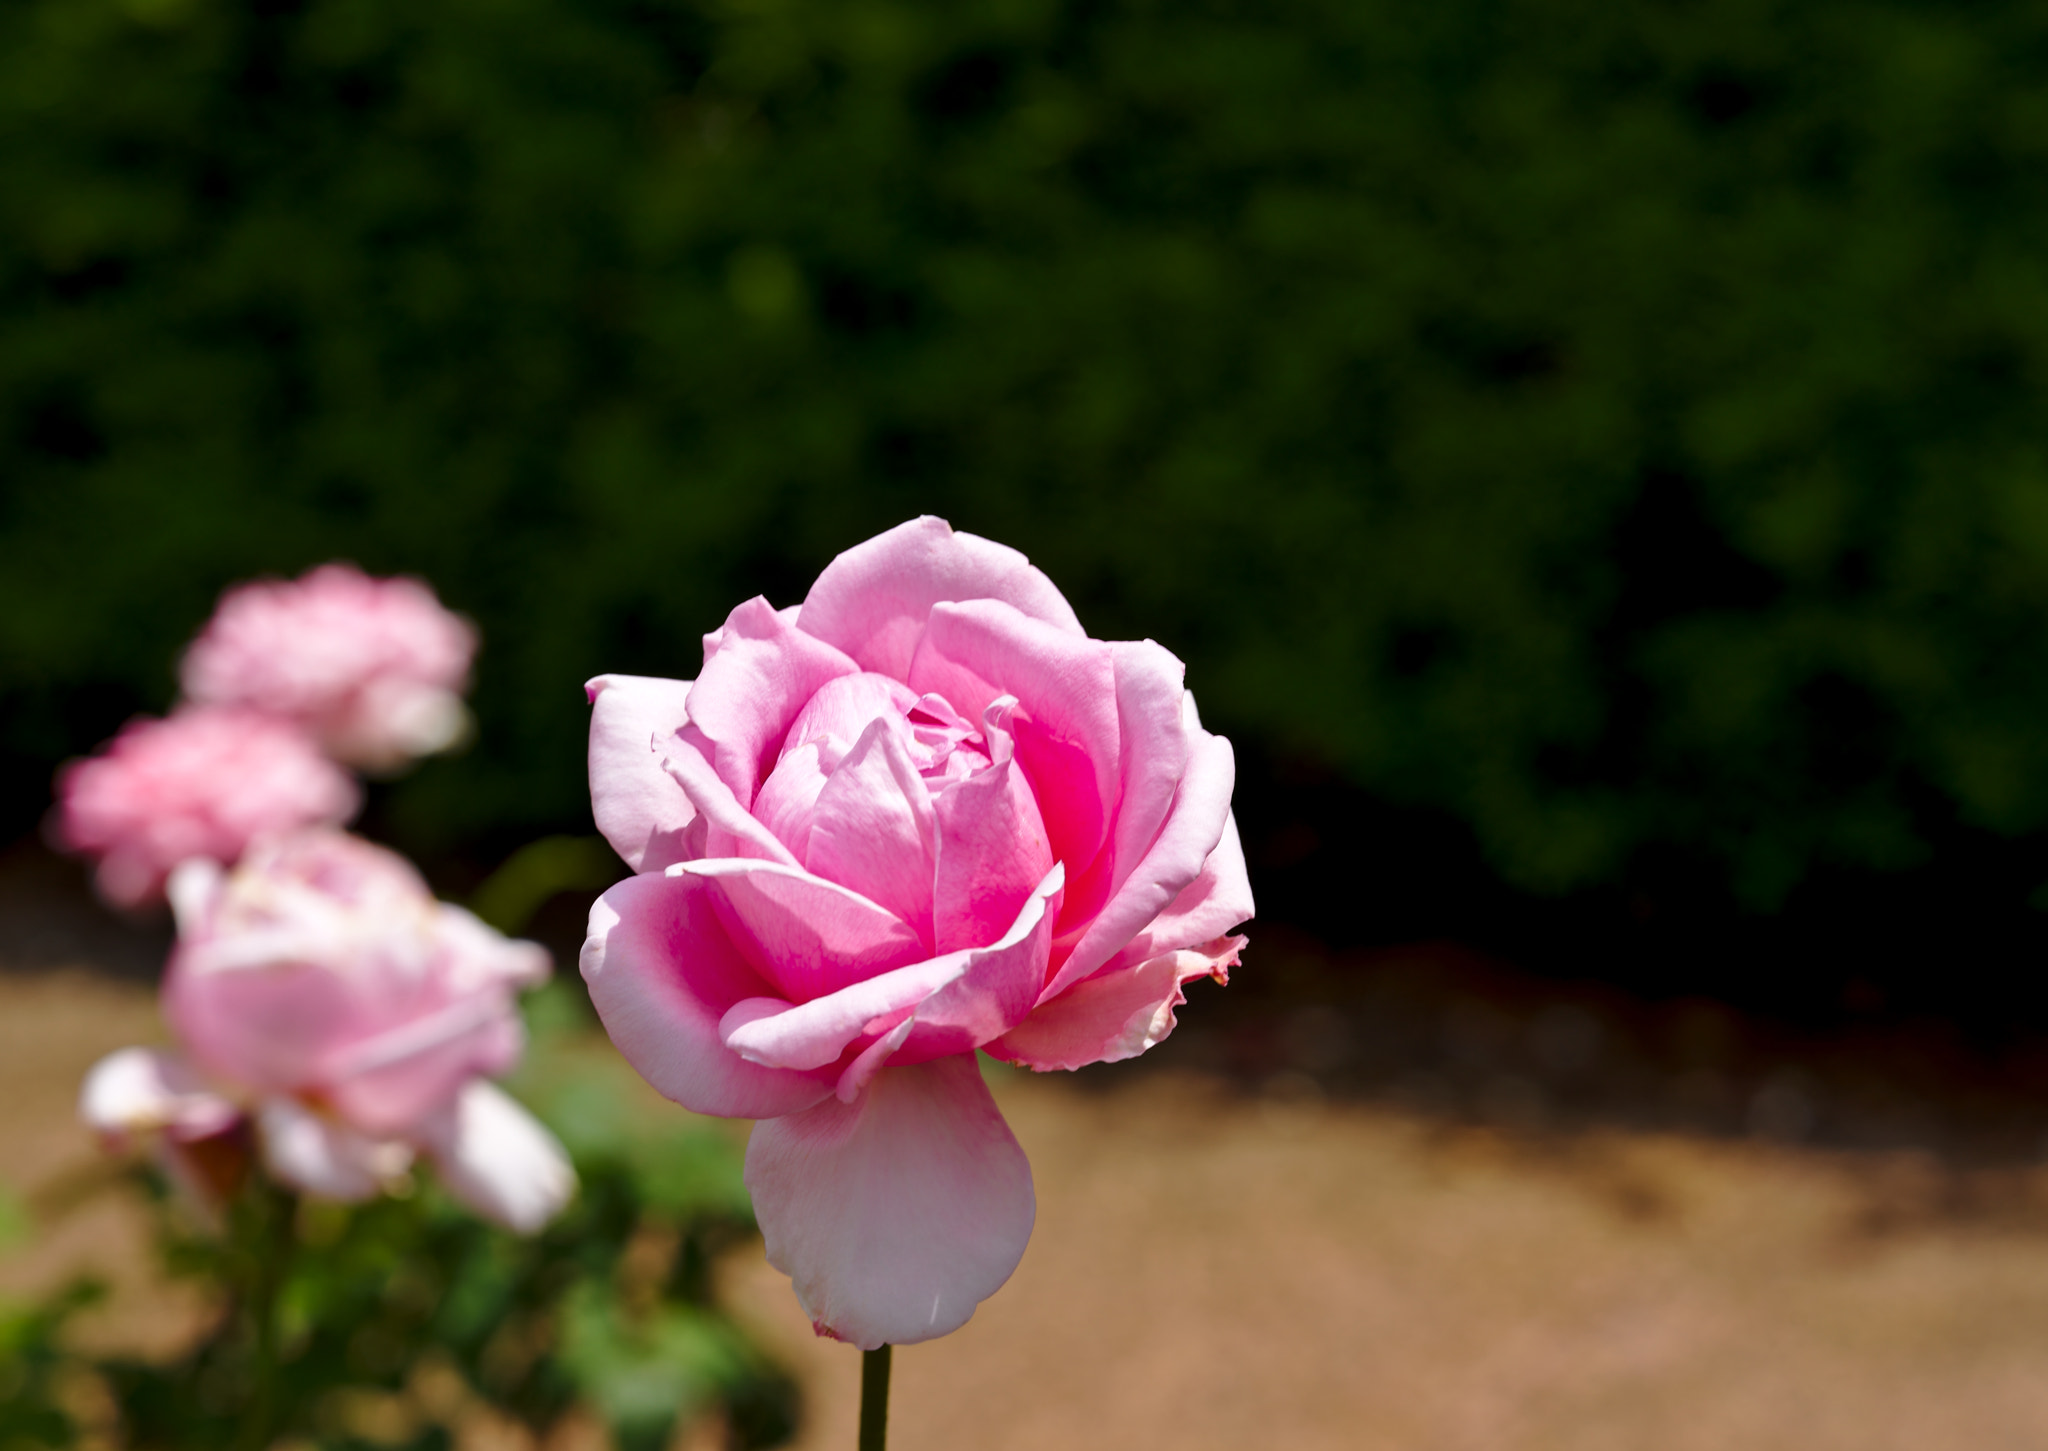 ZEISS Otus 85mm F1.4 sample photo. "eiffel tower" - a hybrid rose photography